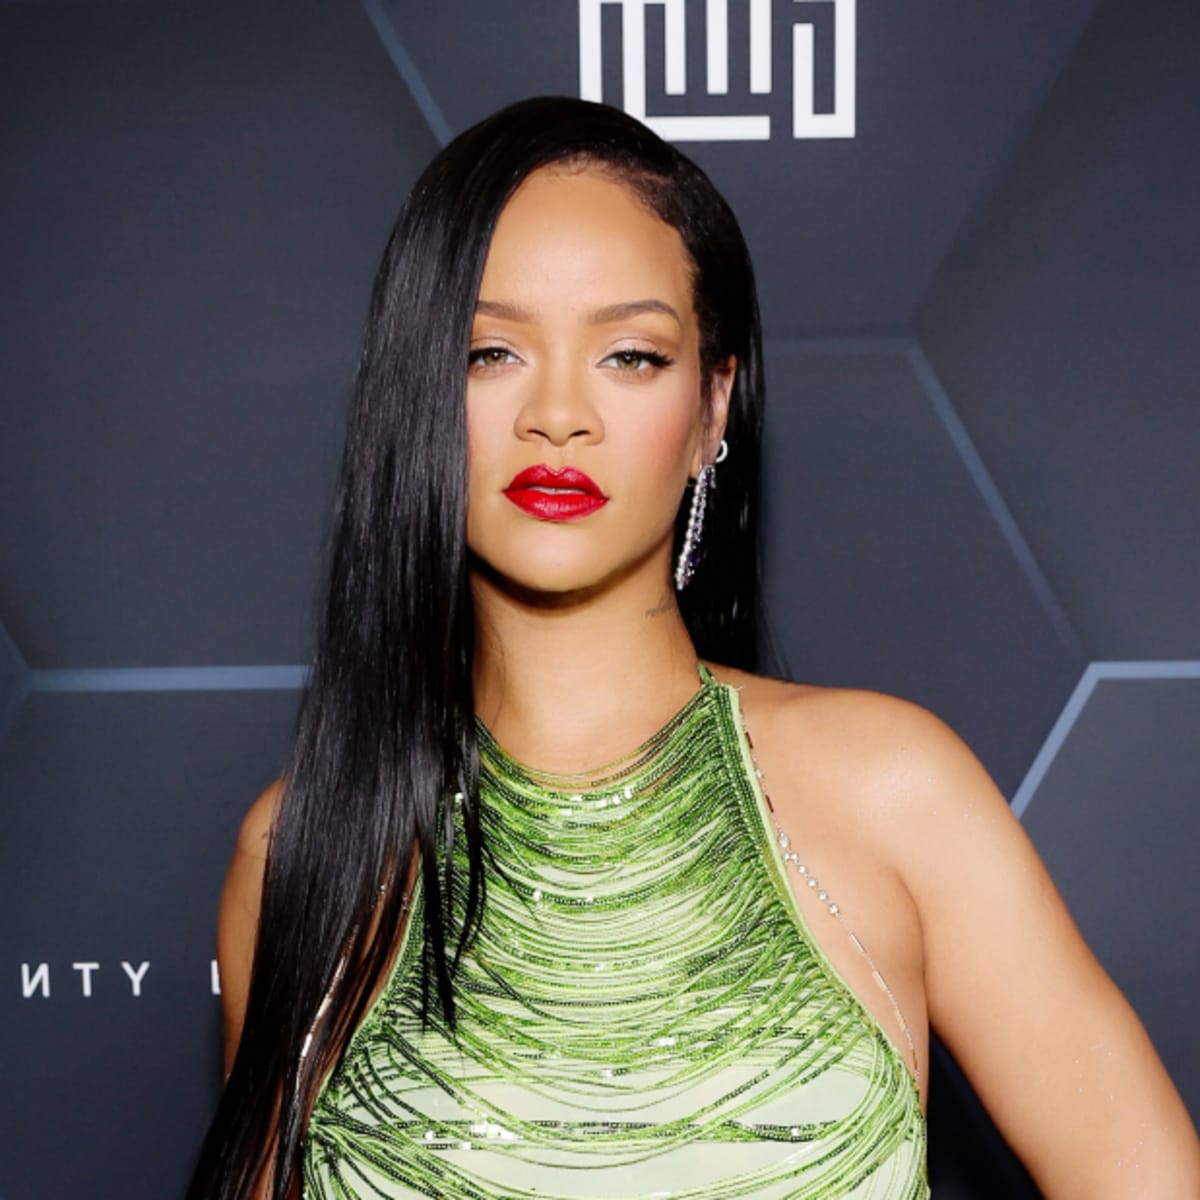 Rihanna's Fenty Skin Is Coming to the UAE - GQ Middle East